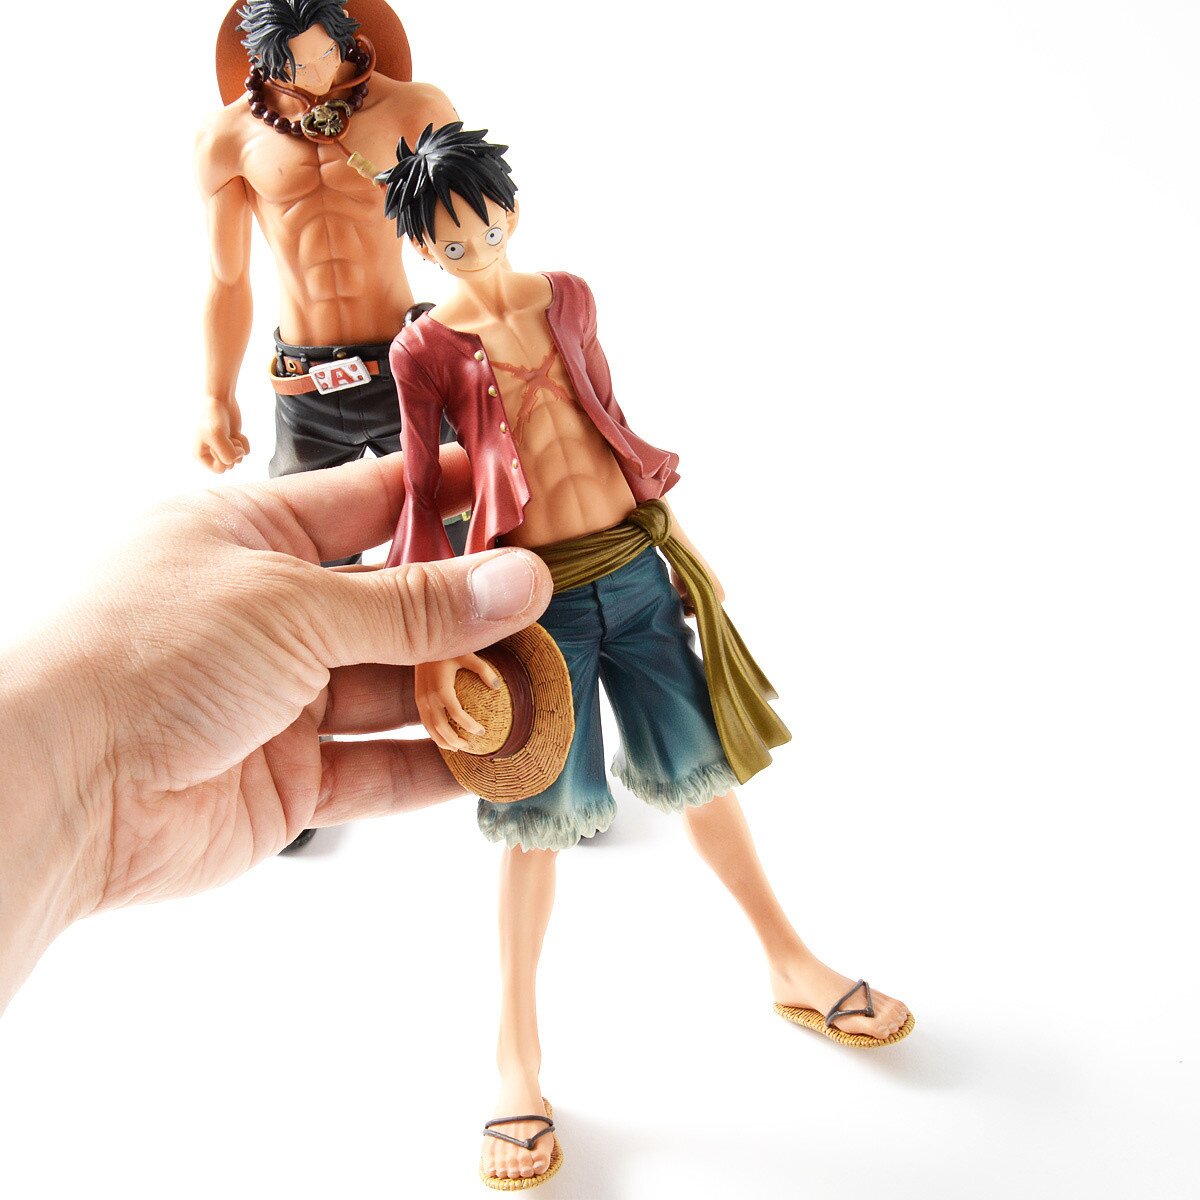 One Piece Master Stars Piece Revival Collector’s Set